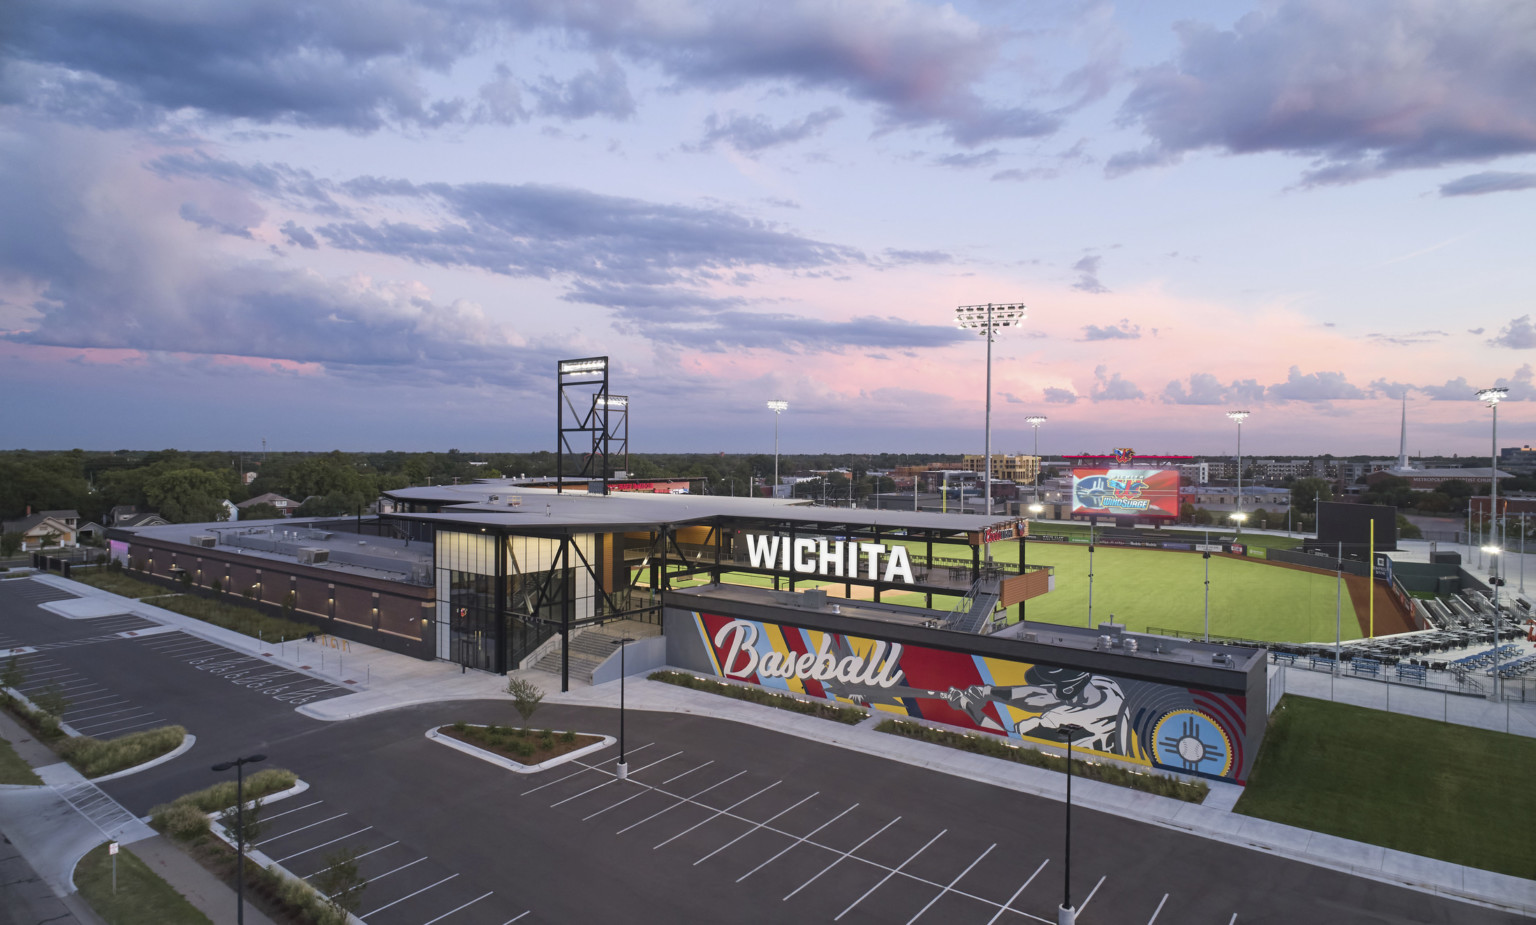 Aerial view of Riverfront Stadium seen from front entrance with colorful mural with white Wichita sign above